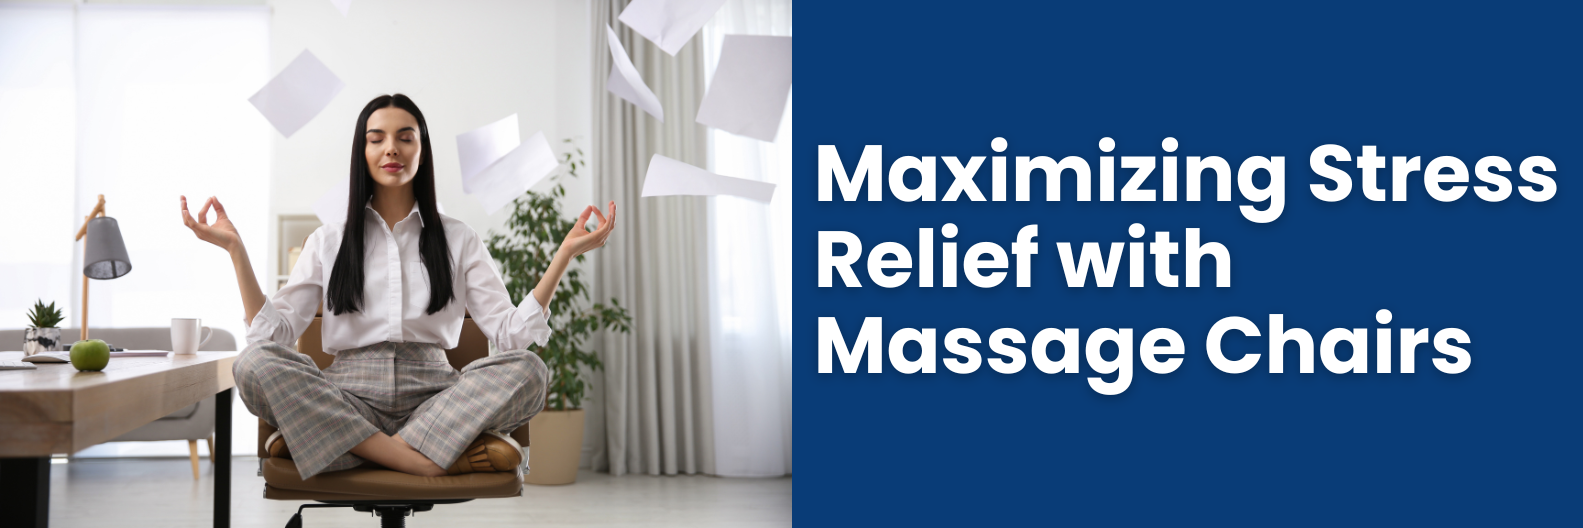 Get Stress Relief from Massage Chair Use by investing in relaxation that soothes tension and enhances overall well-being. 